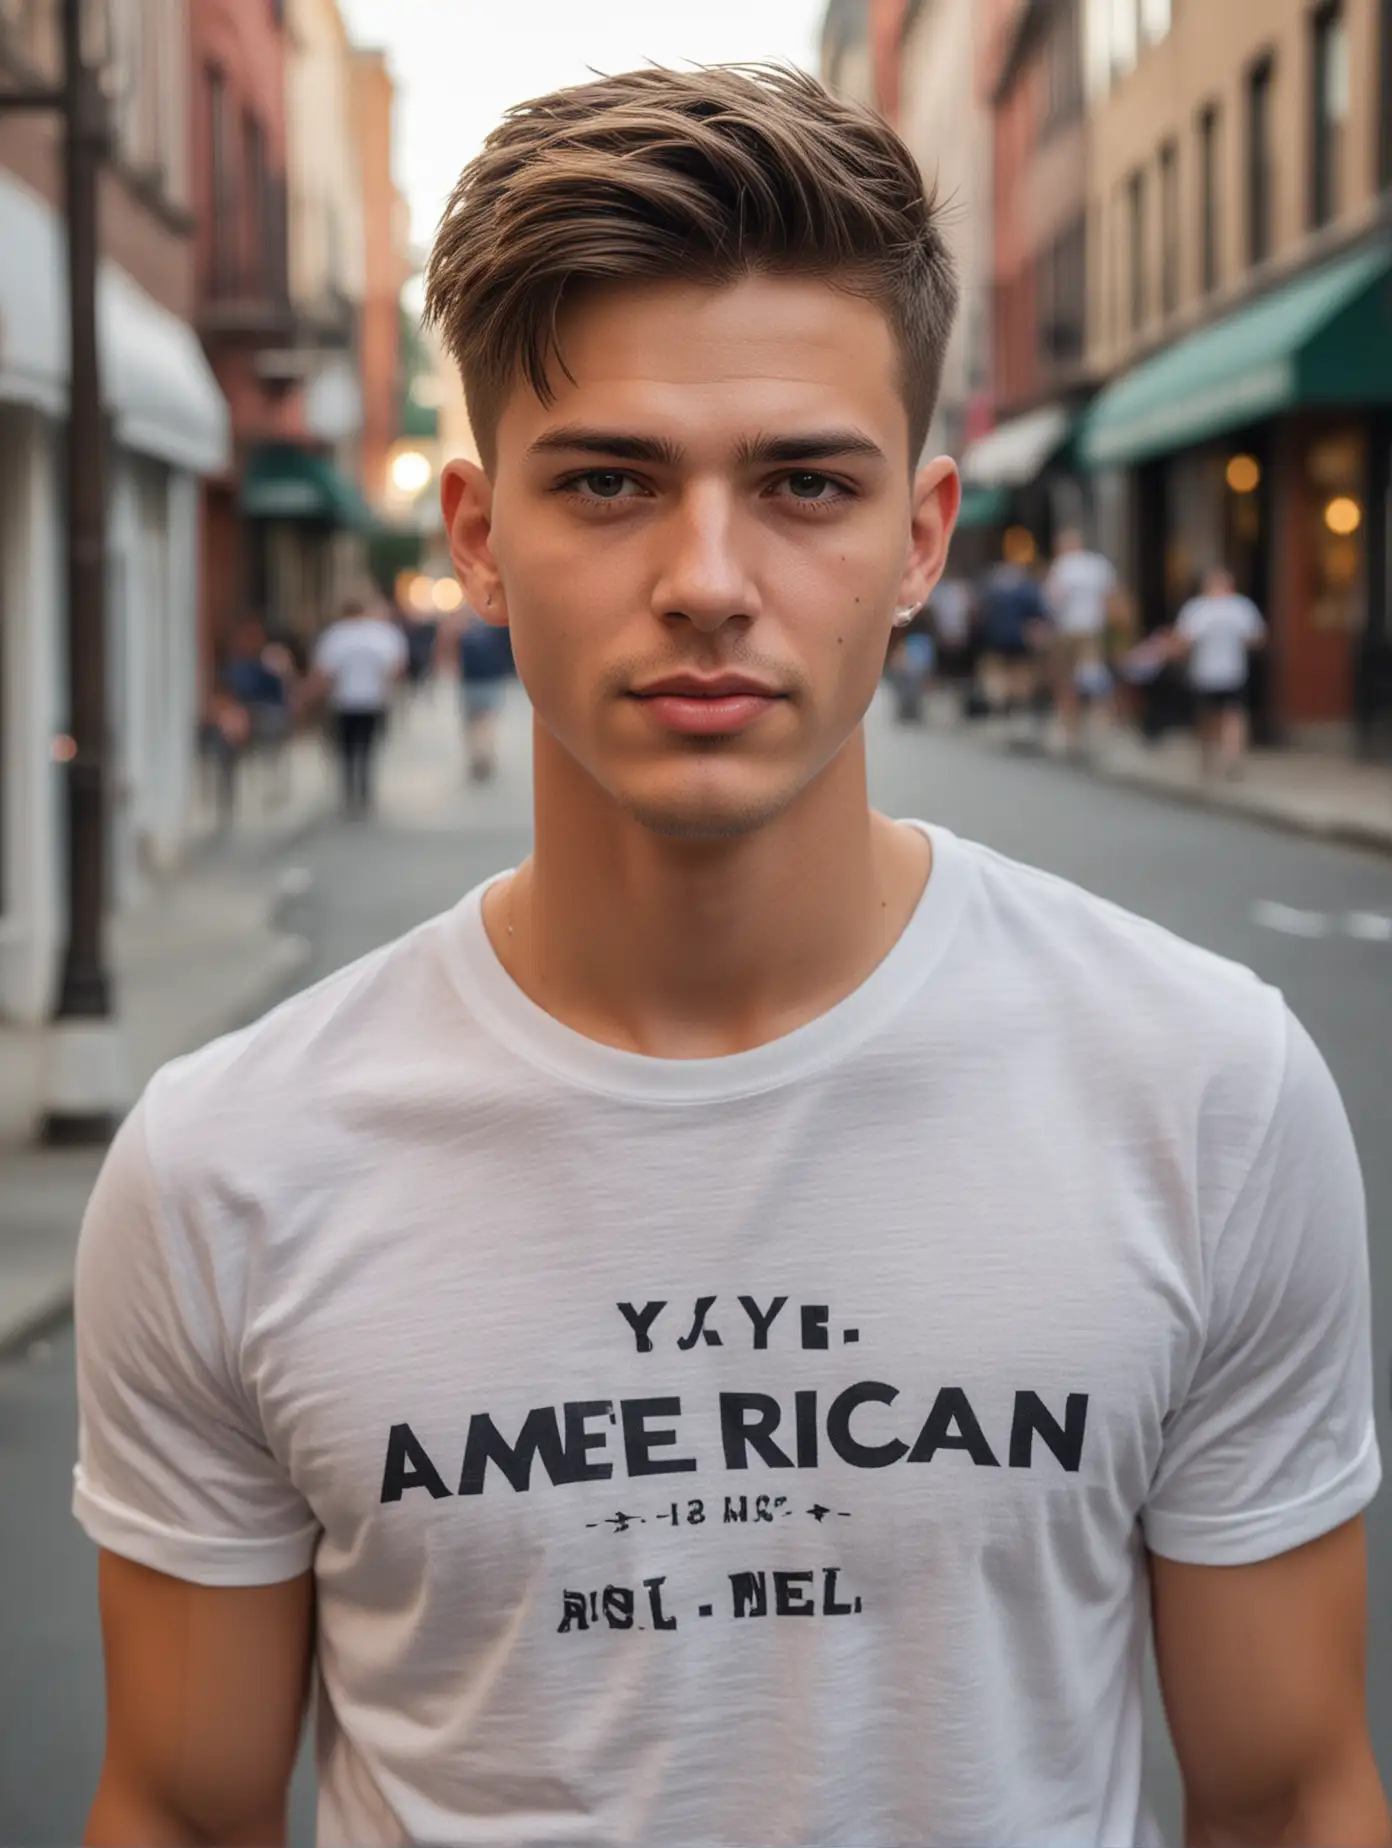 Young Man with Stylish Haircut Capturing Street Photography